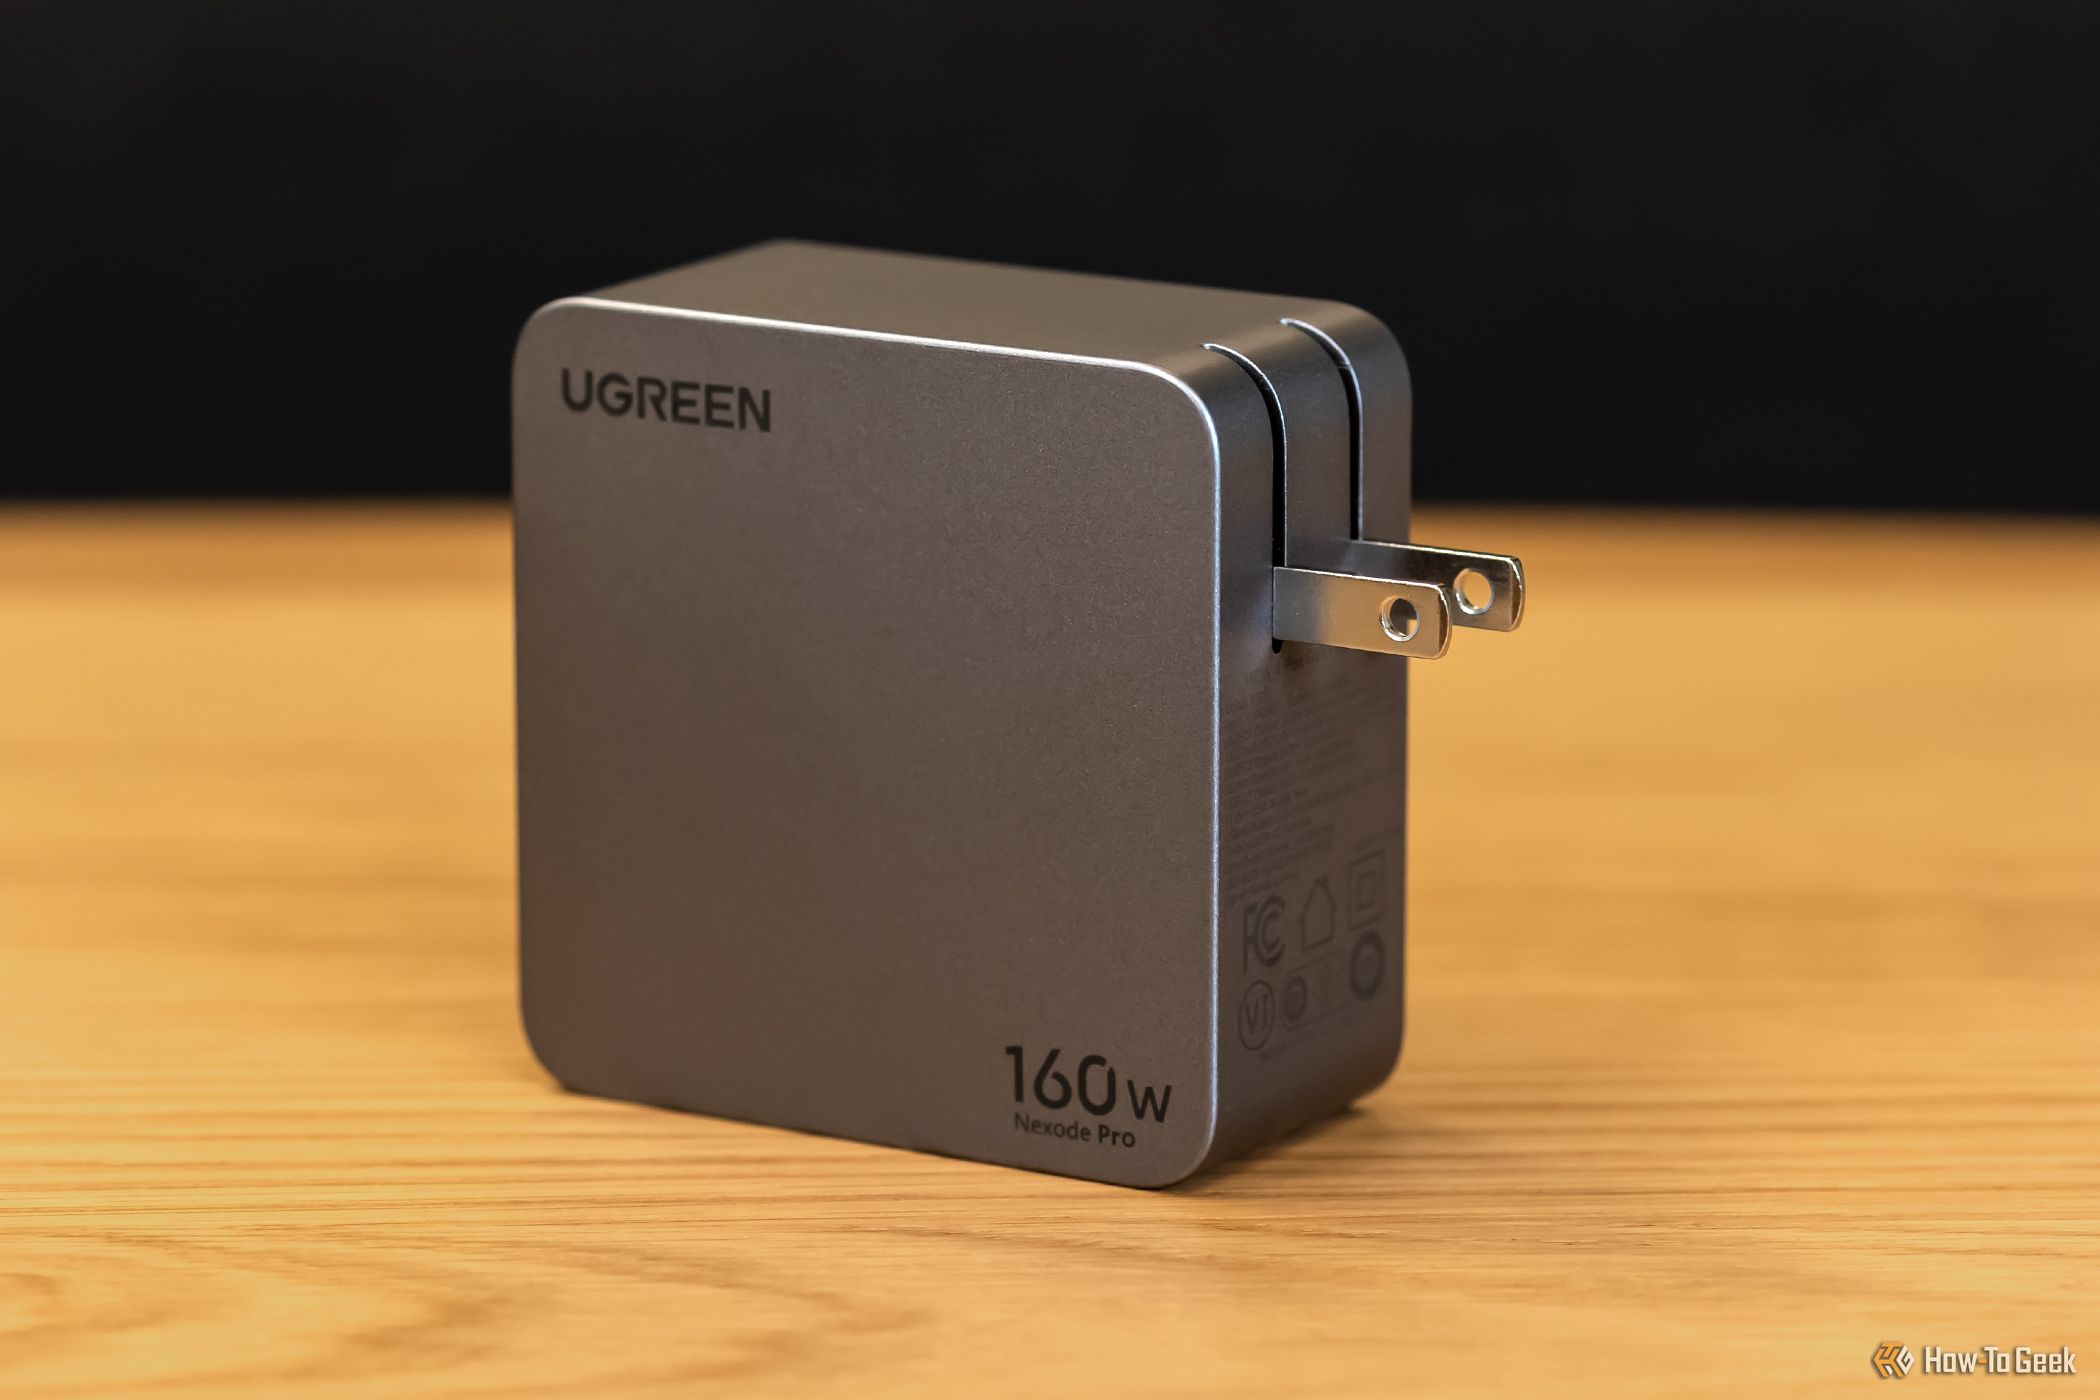 Ugreen launches four new Nexode Pro GaN chargers up to 160W for  power-hungry users 